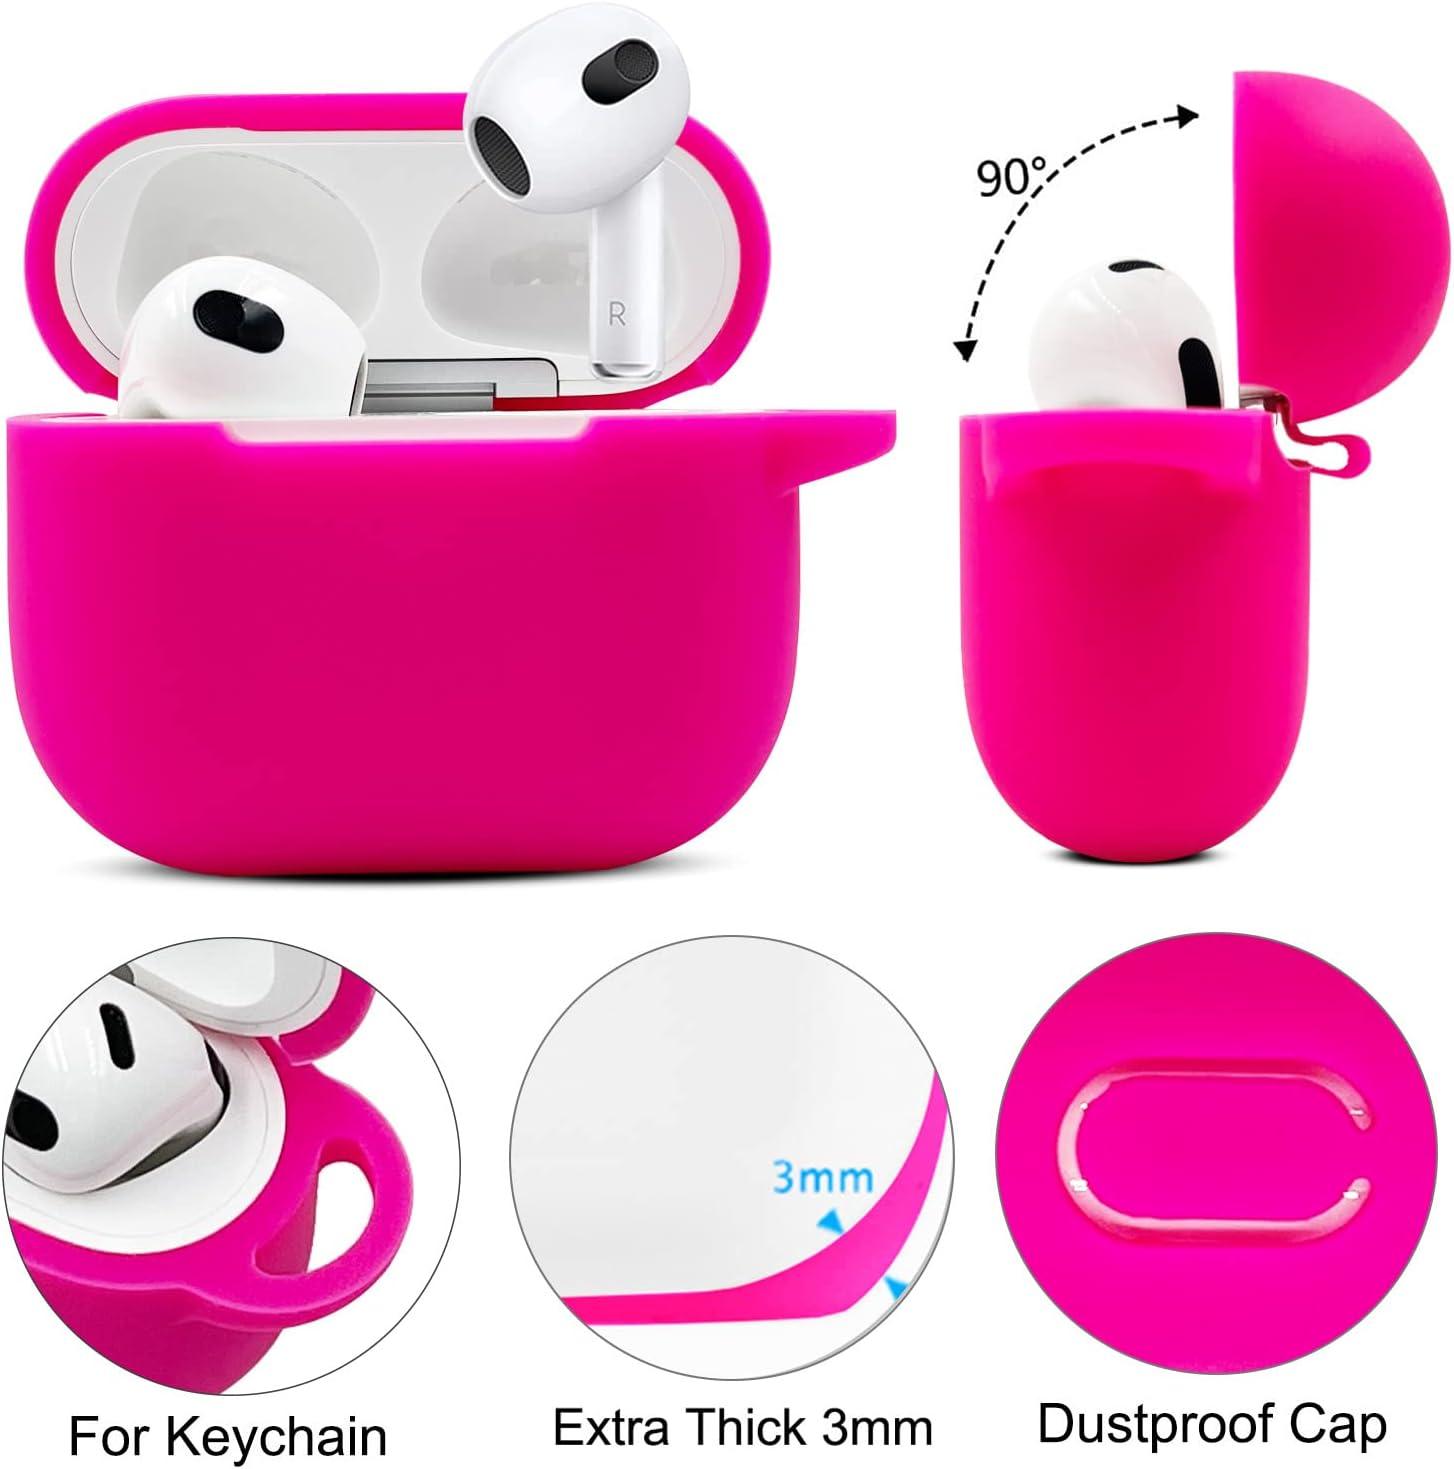 FR Fashion Co. Silicone AirPods Pro Case Cover with Bracelet Keychain - FR Fashion Co. 